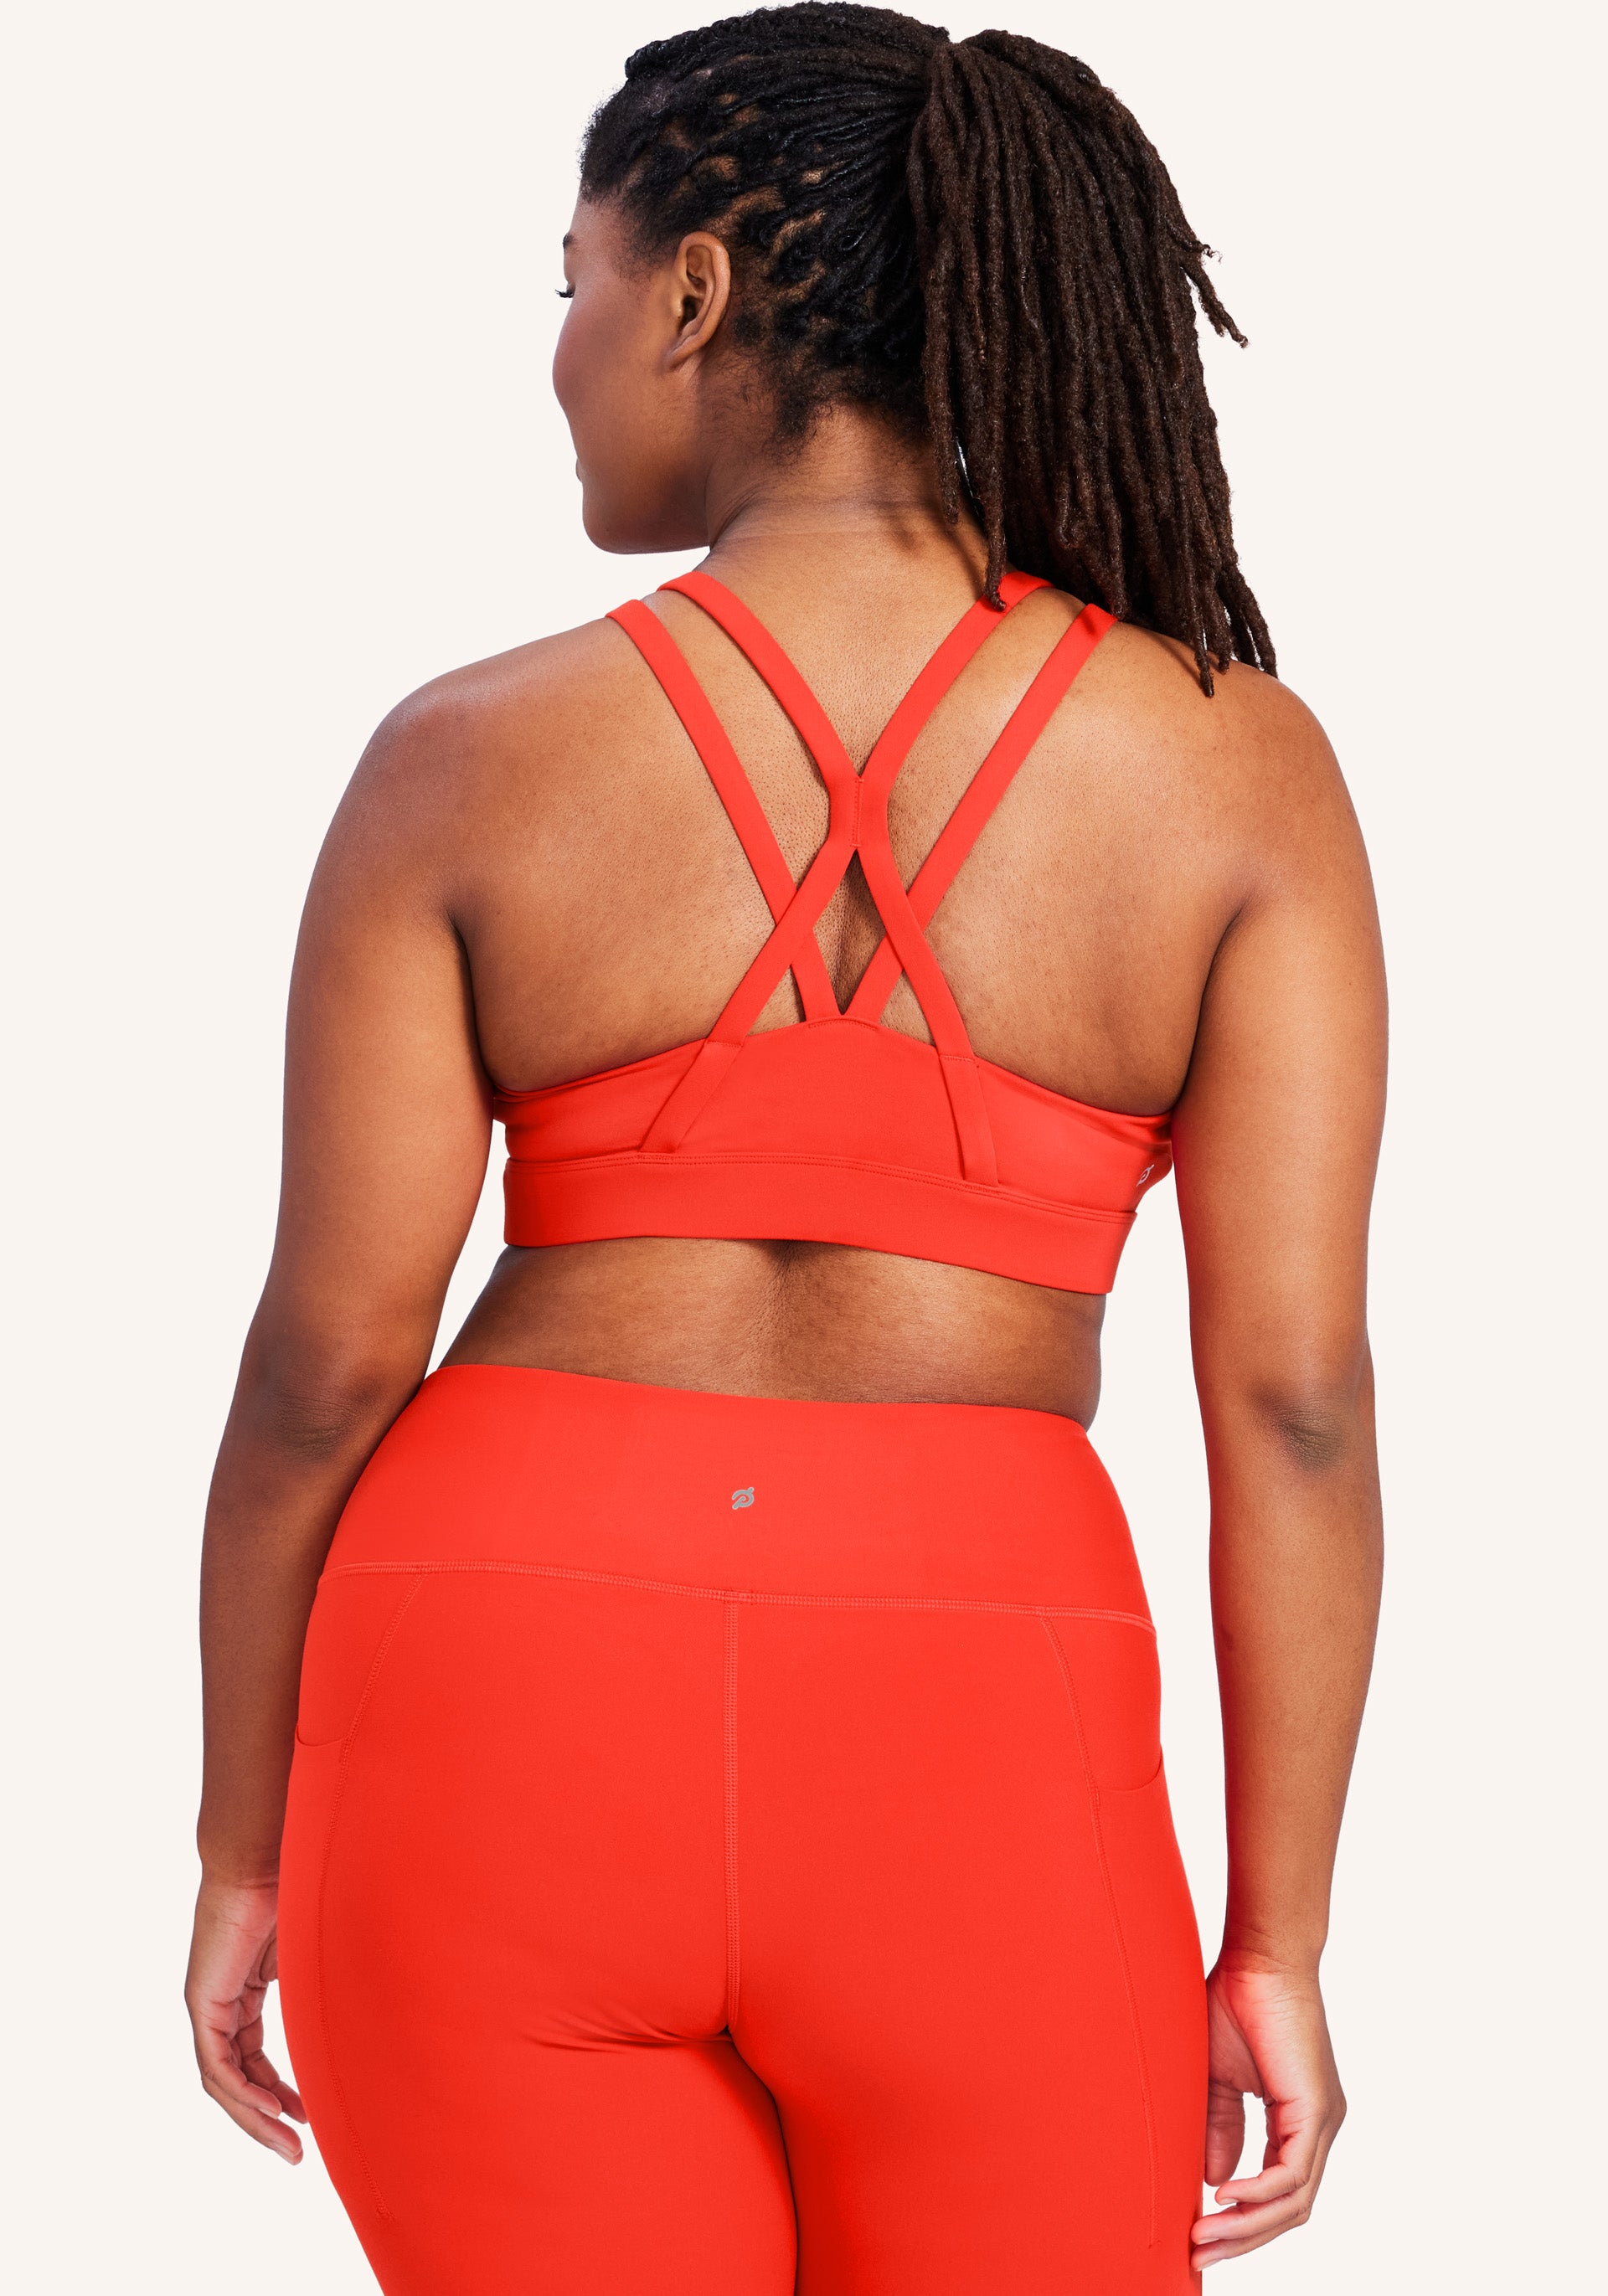 Style spotlight: the Cadent Strappy Elevate Thin Band Bra - if you love our  bestselling Cadent bra, you'll love this all-new…